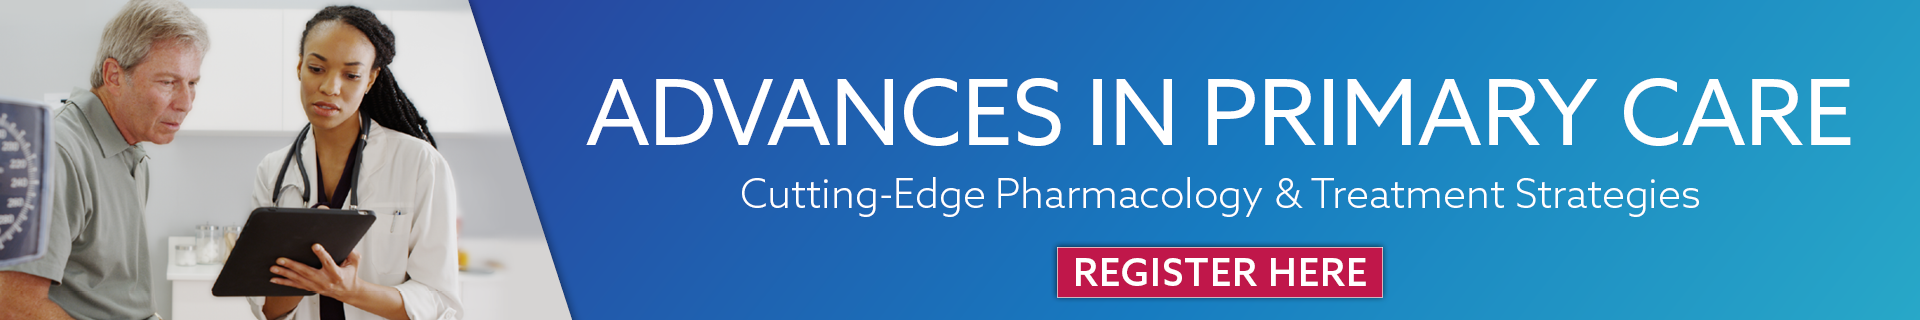 Advances in Primary Care: Cutting-Edge Pharmacology & Treatment Strategies